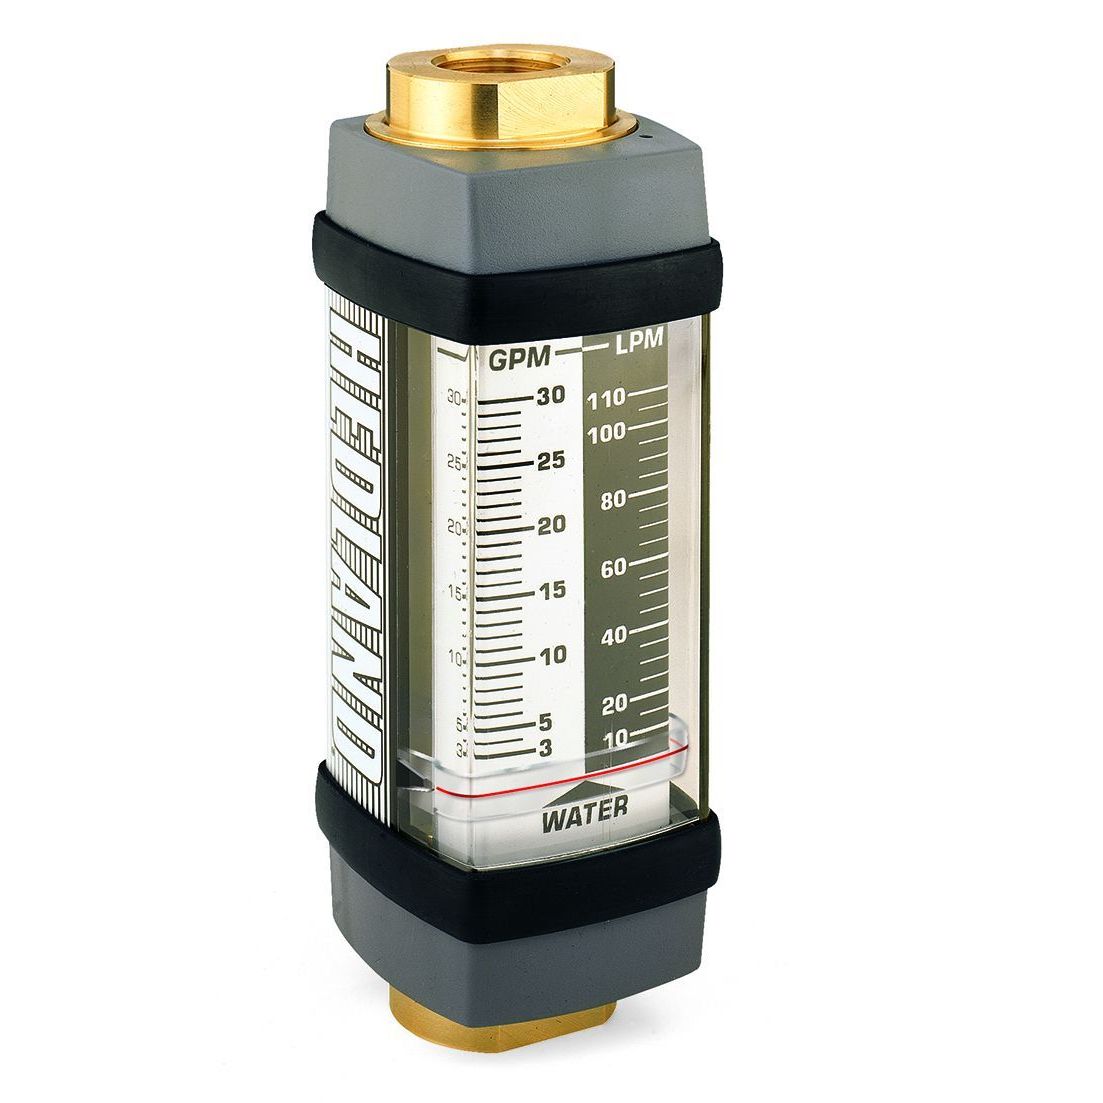 H754B-005 : Hedland 3500psi Brass Flow Meter for Water, #16 SAE (1), 0.5 to 5.0 GPM